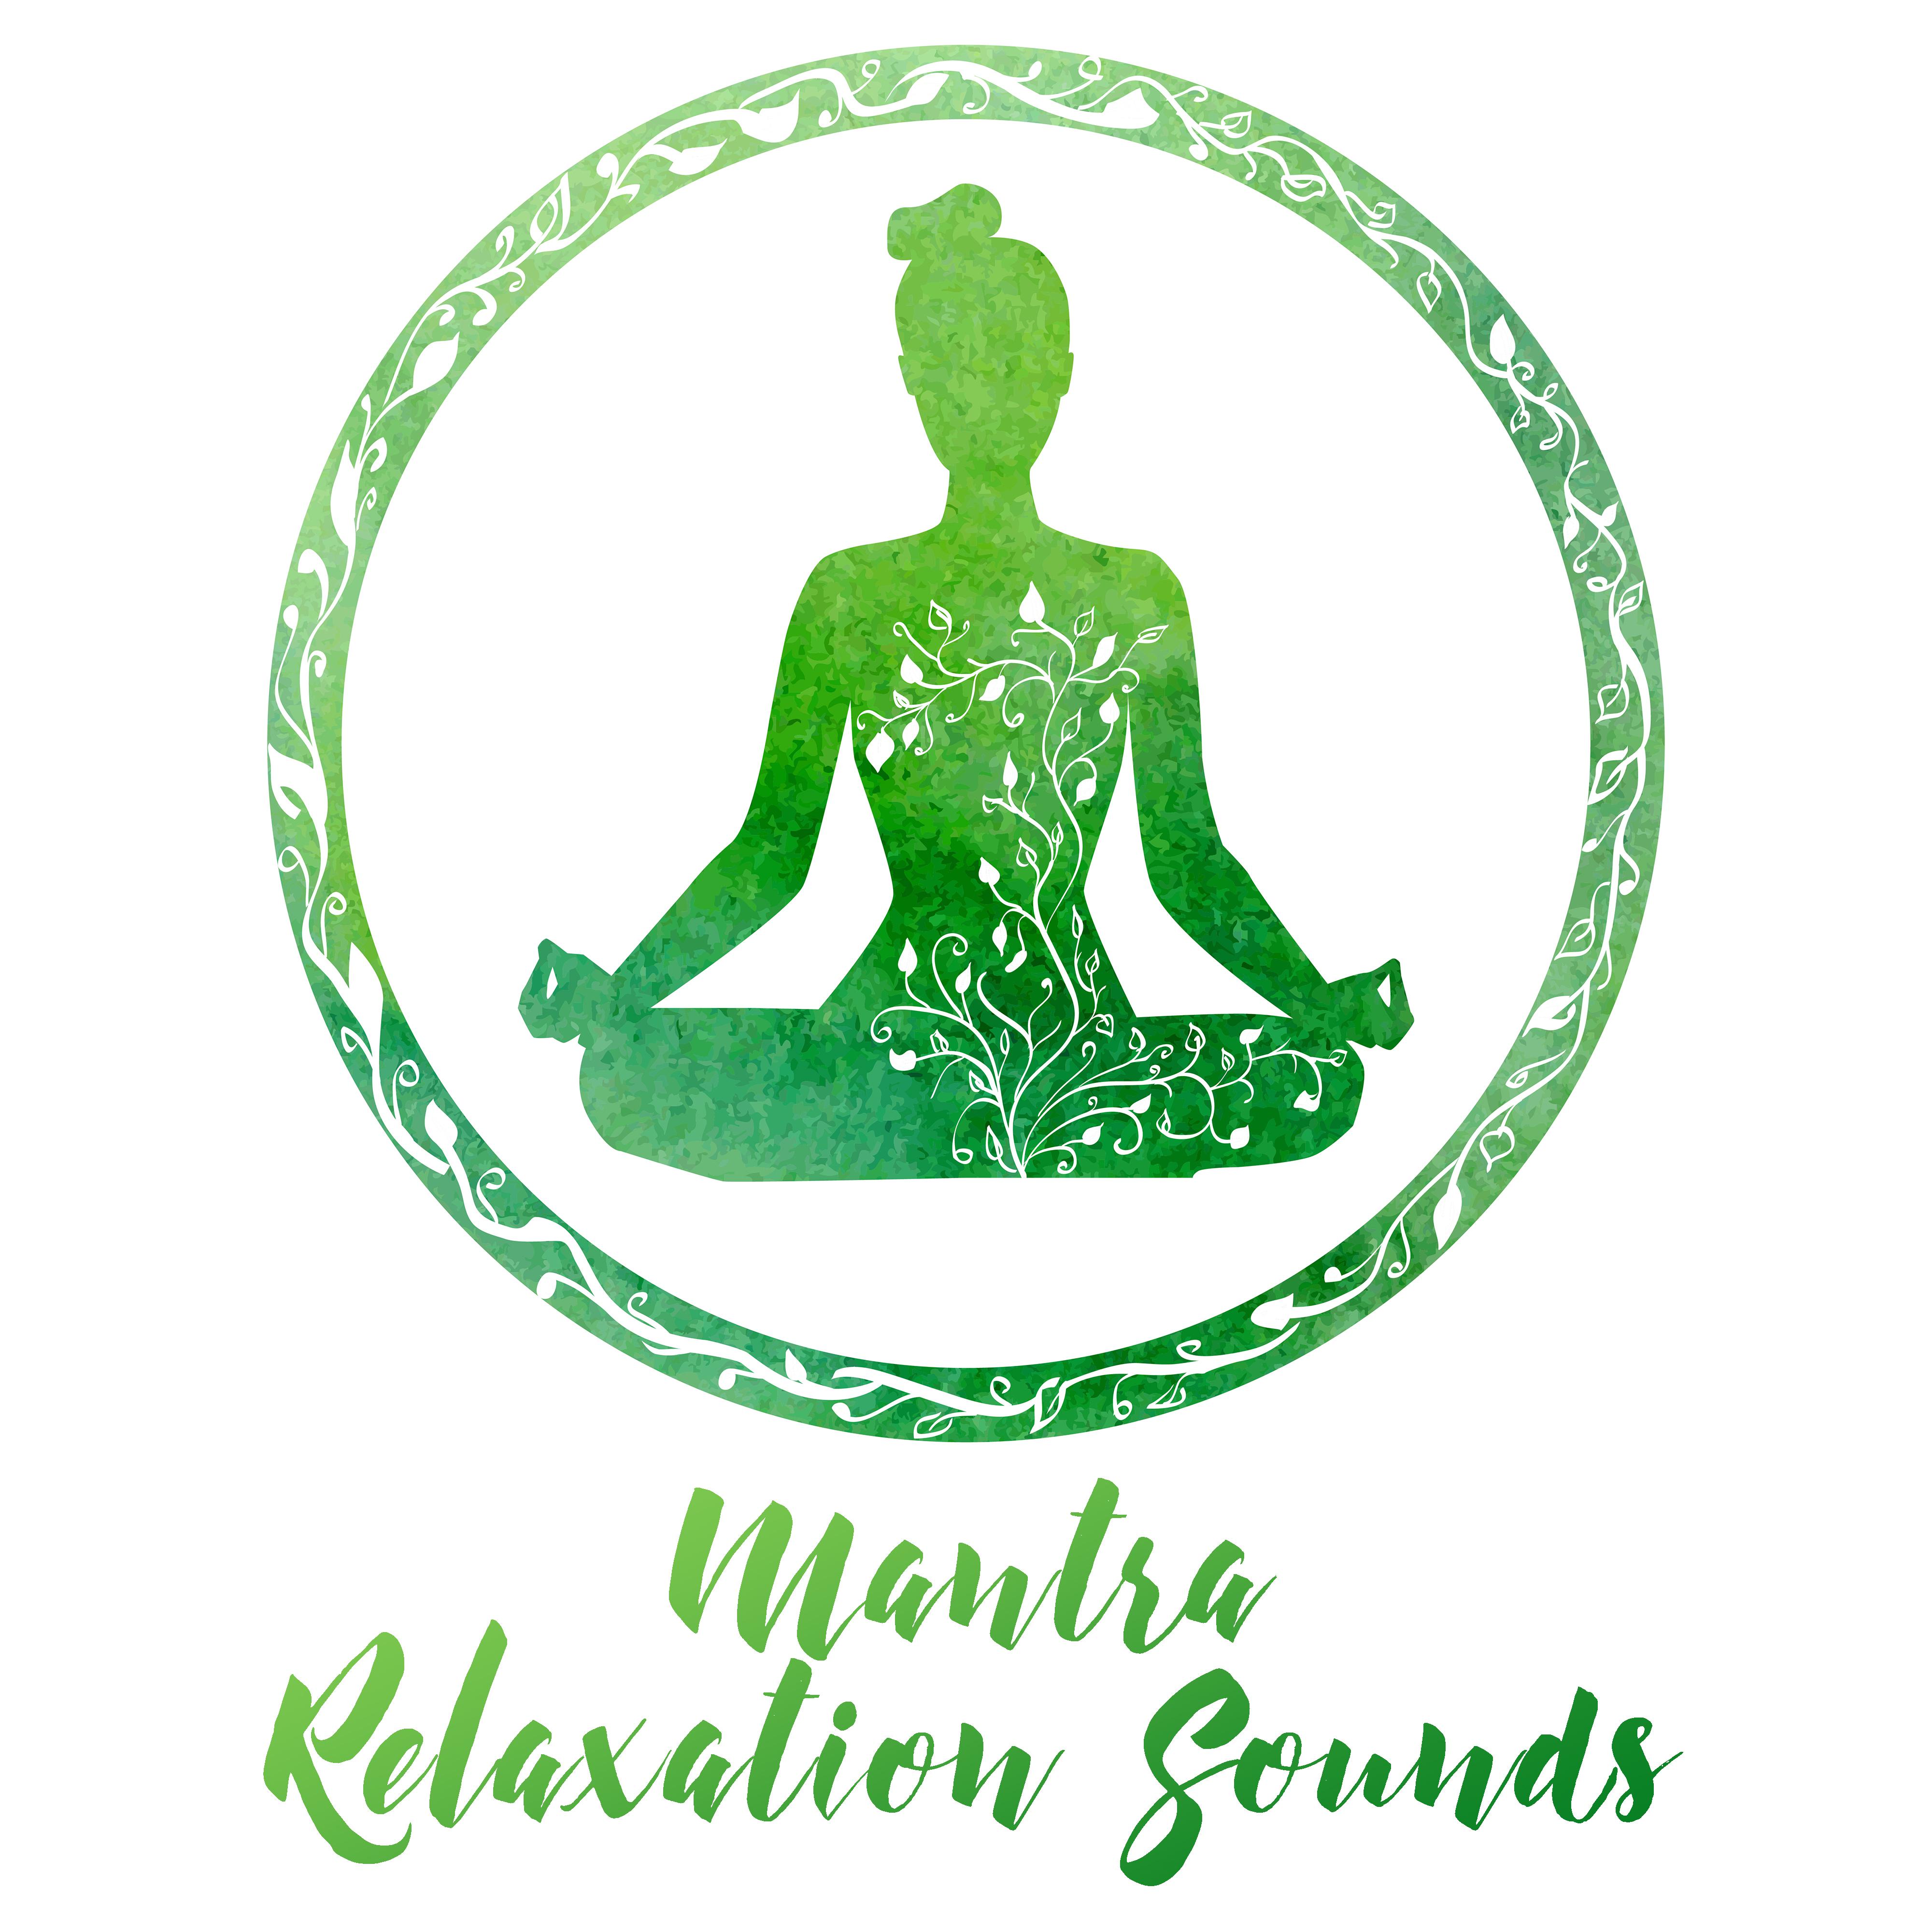 Mantra Relaxation Sounds